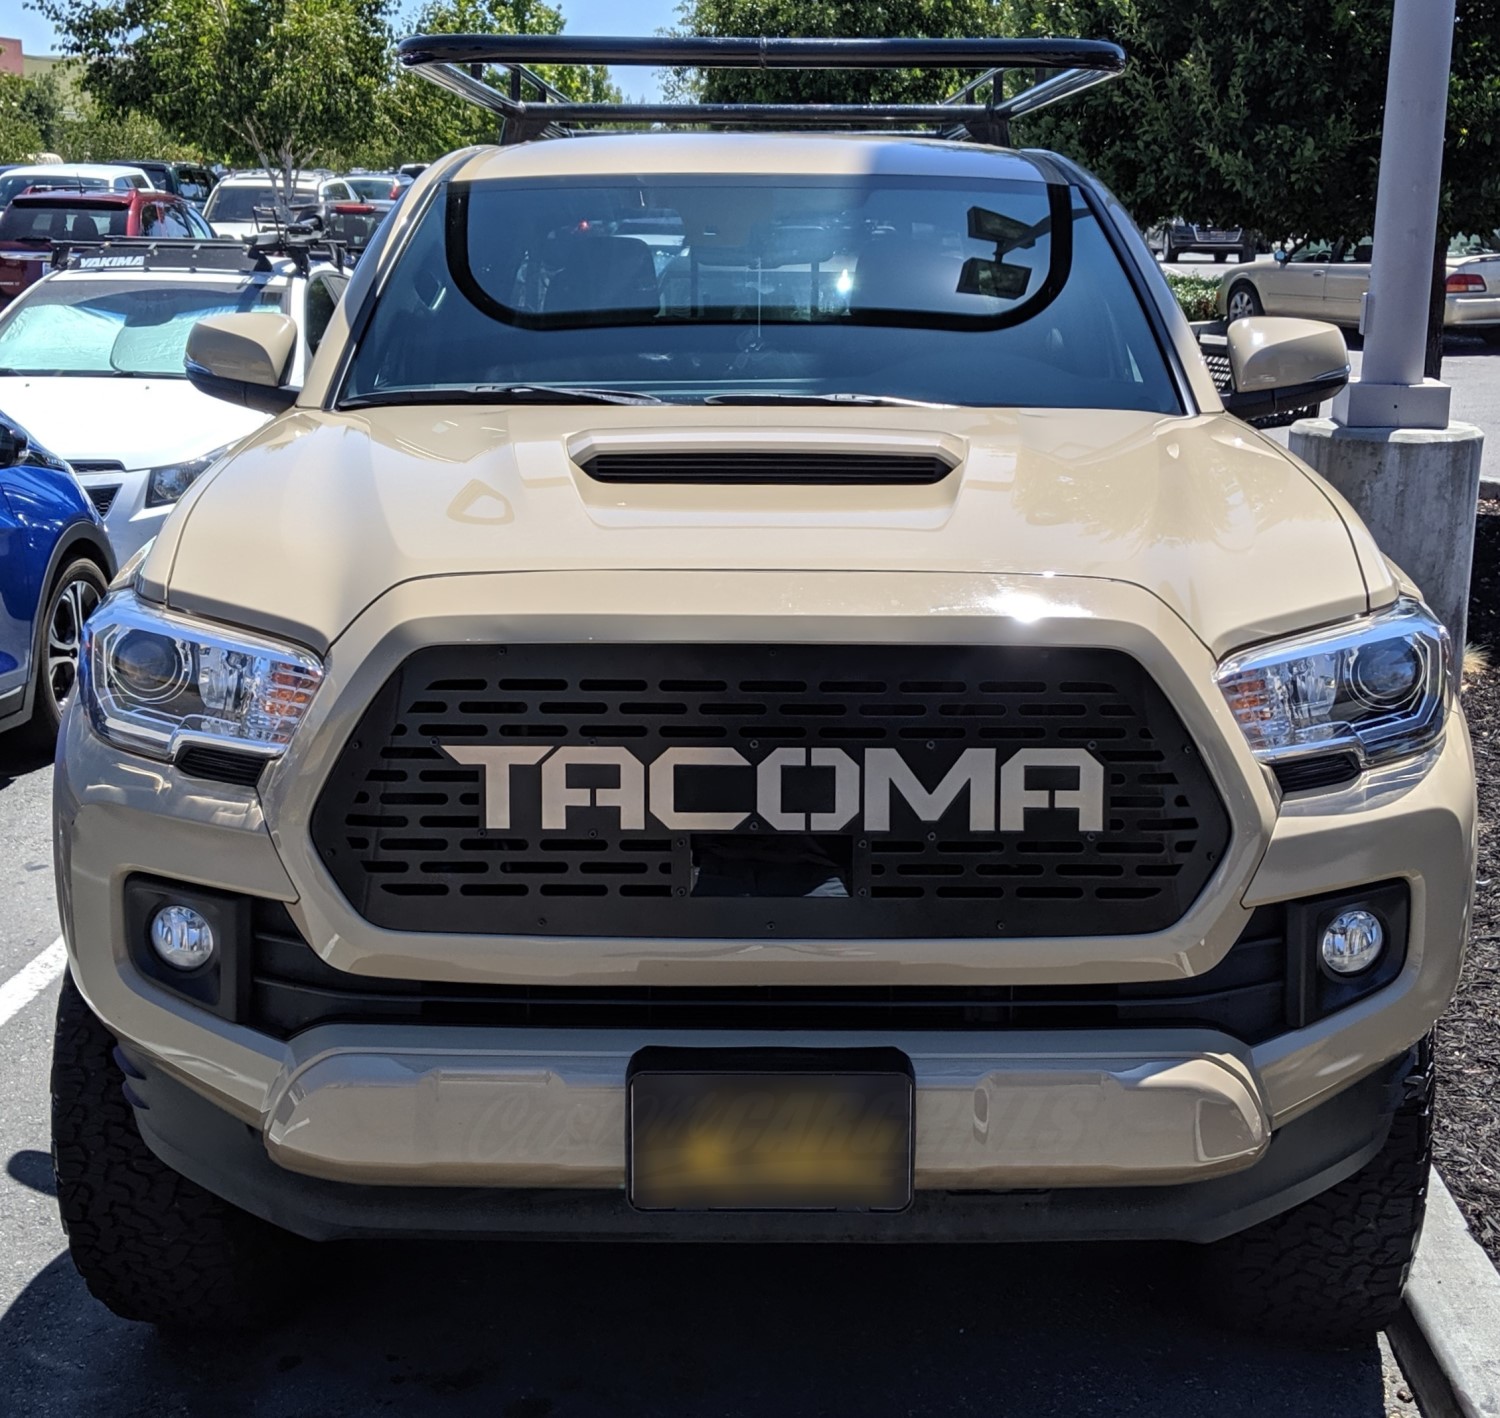 Upgrade Your 2019 Tacoma's Front End with a Custom Black Stainless Steel Grille